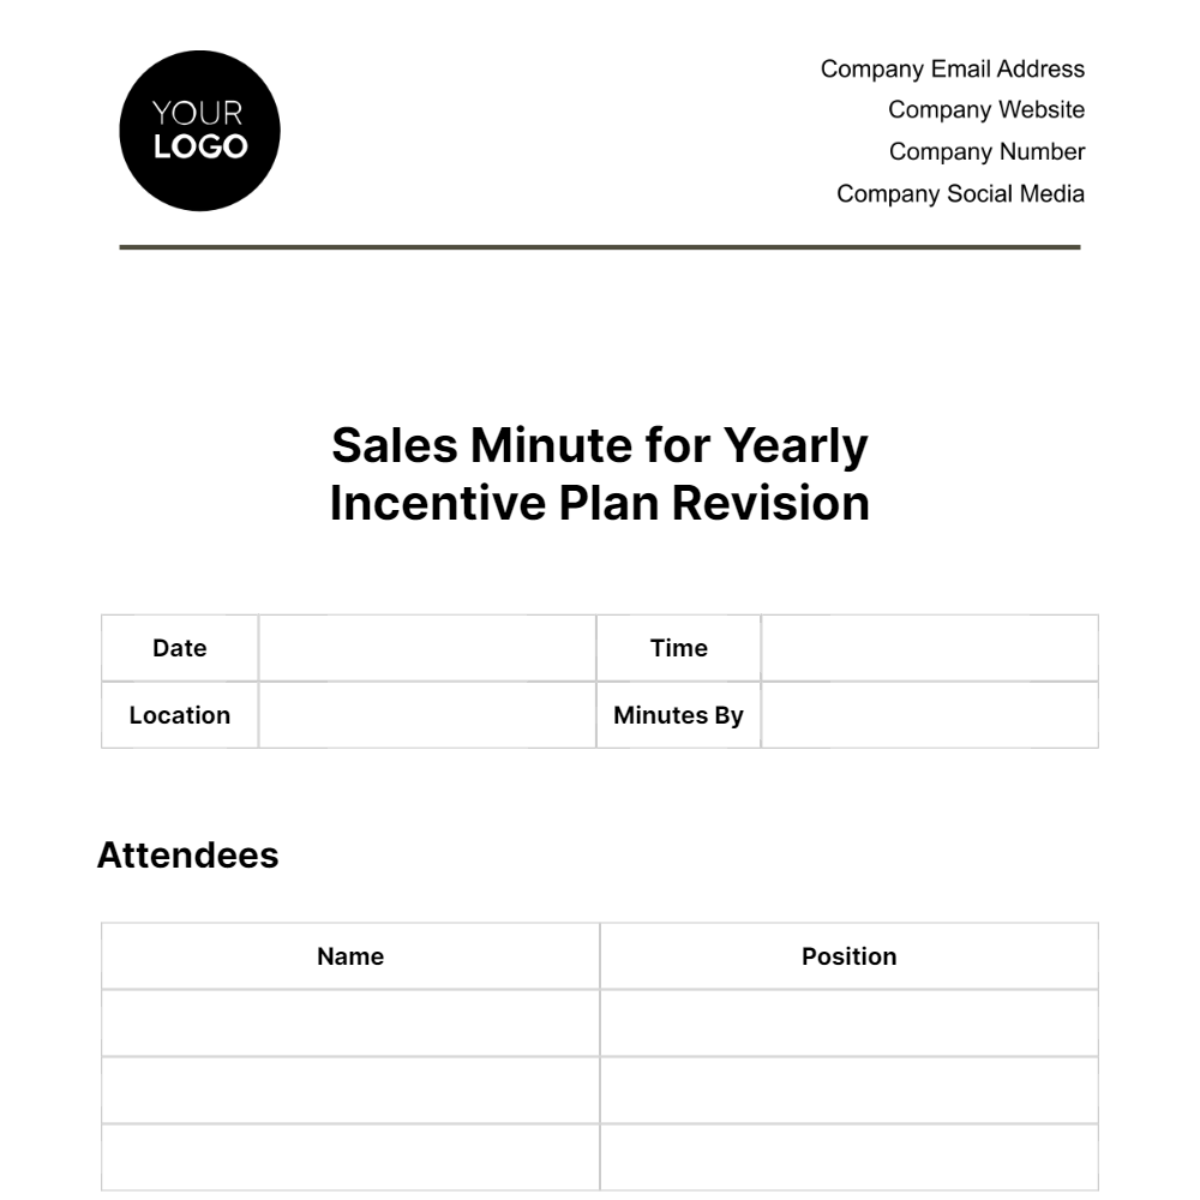 Free Sales Minute for Yearly Incentive Plan Revision Template